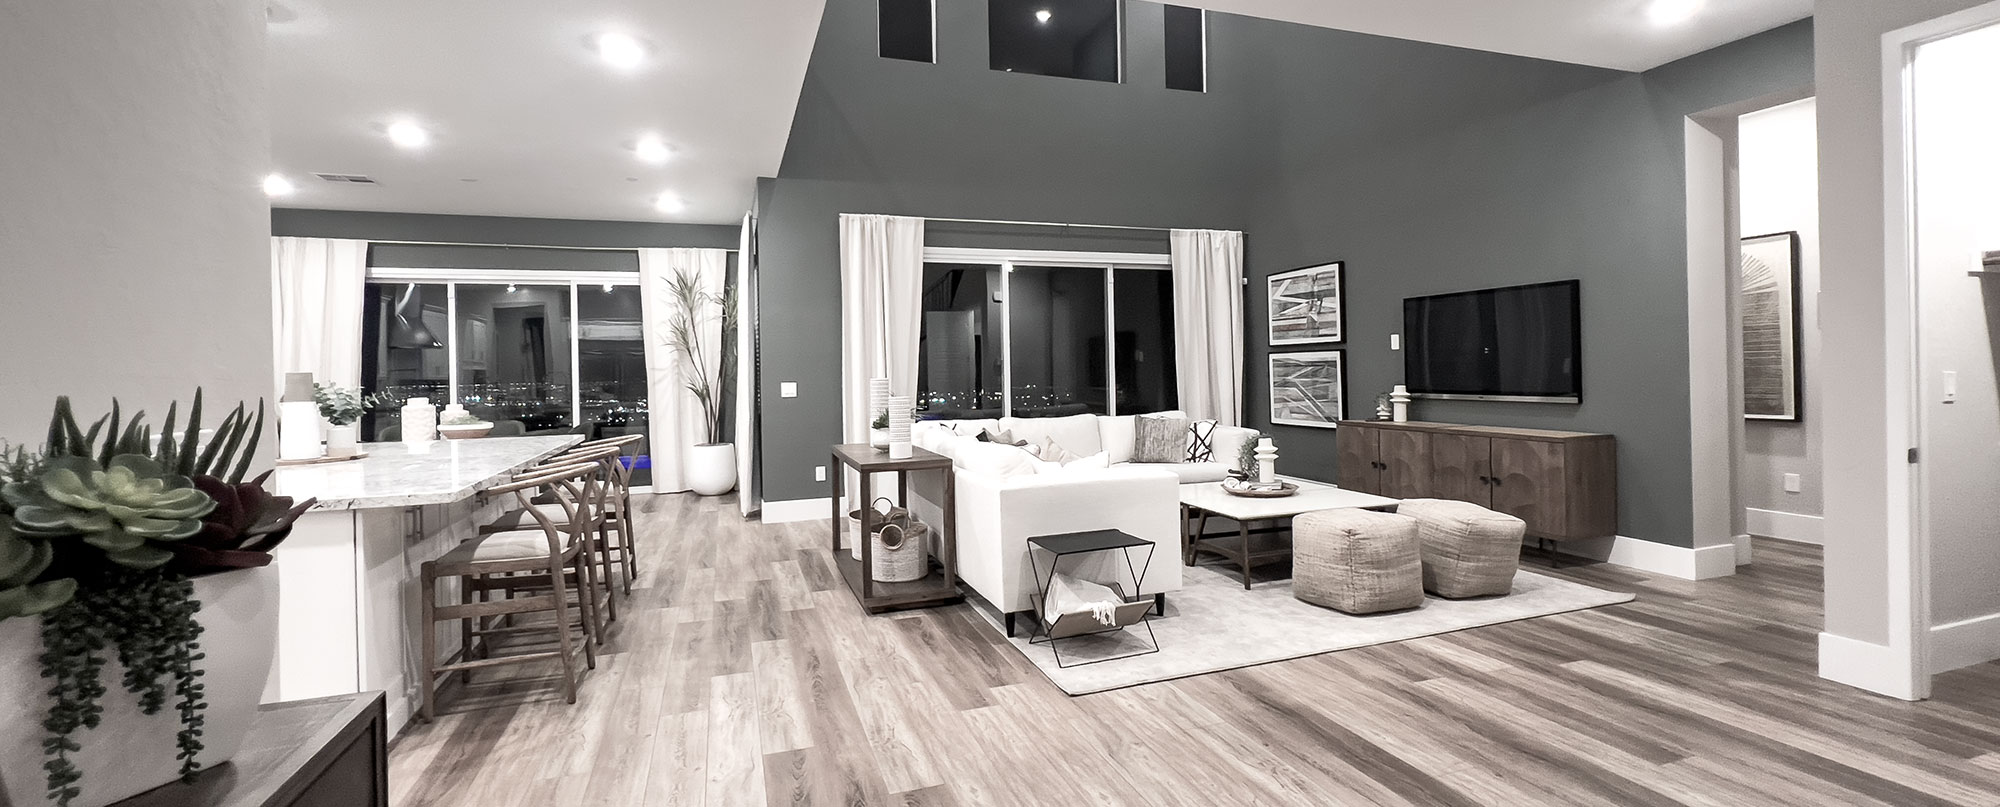 Maximize your ROI with Nevada Desert Realty, living room photo of new home development in Henderson NV